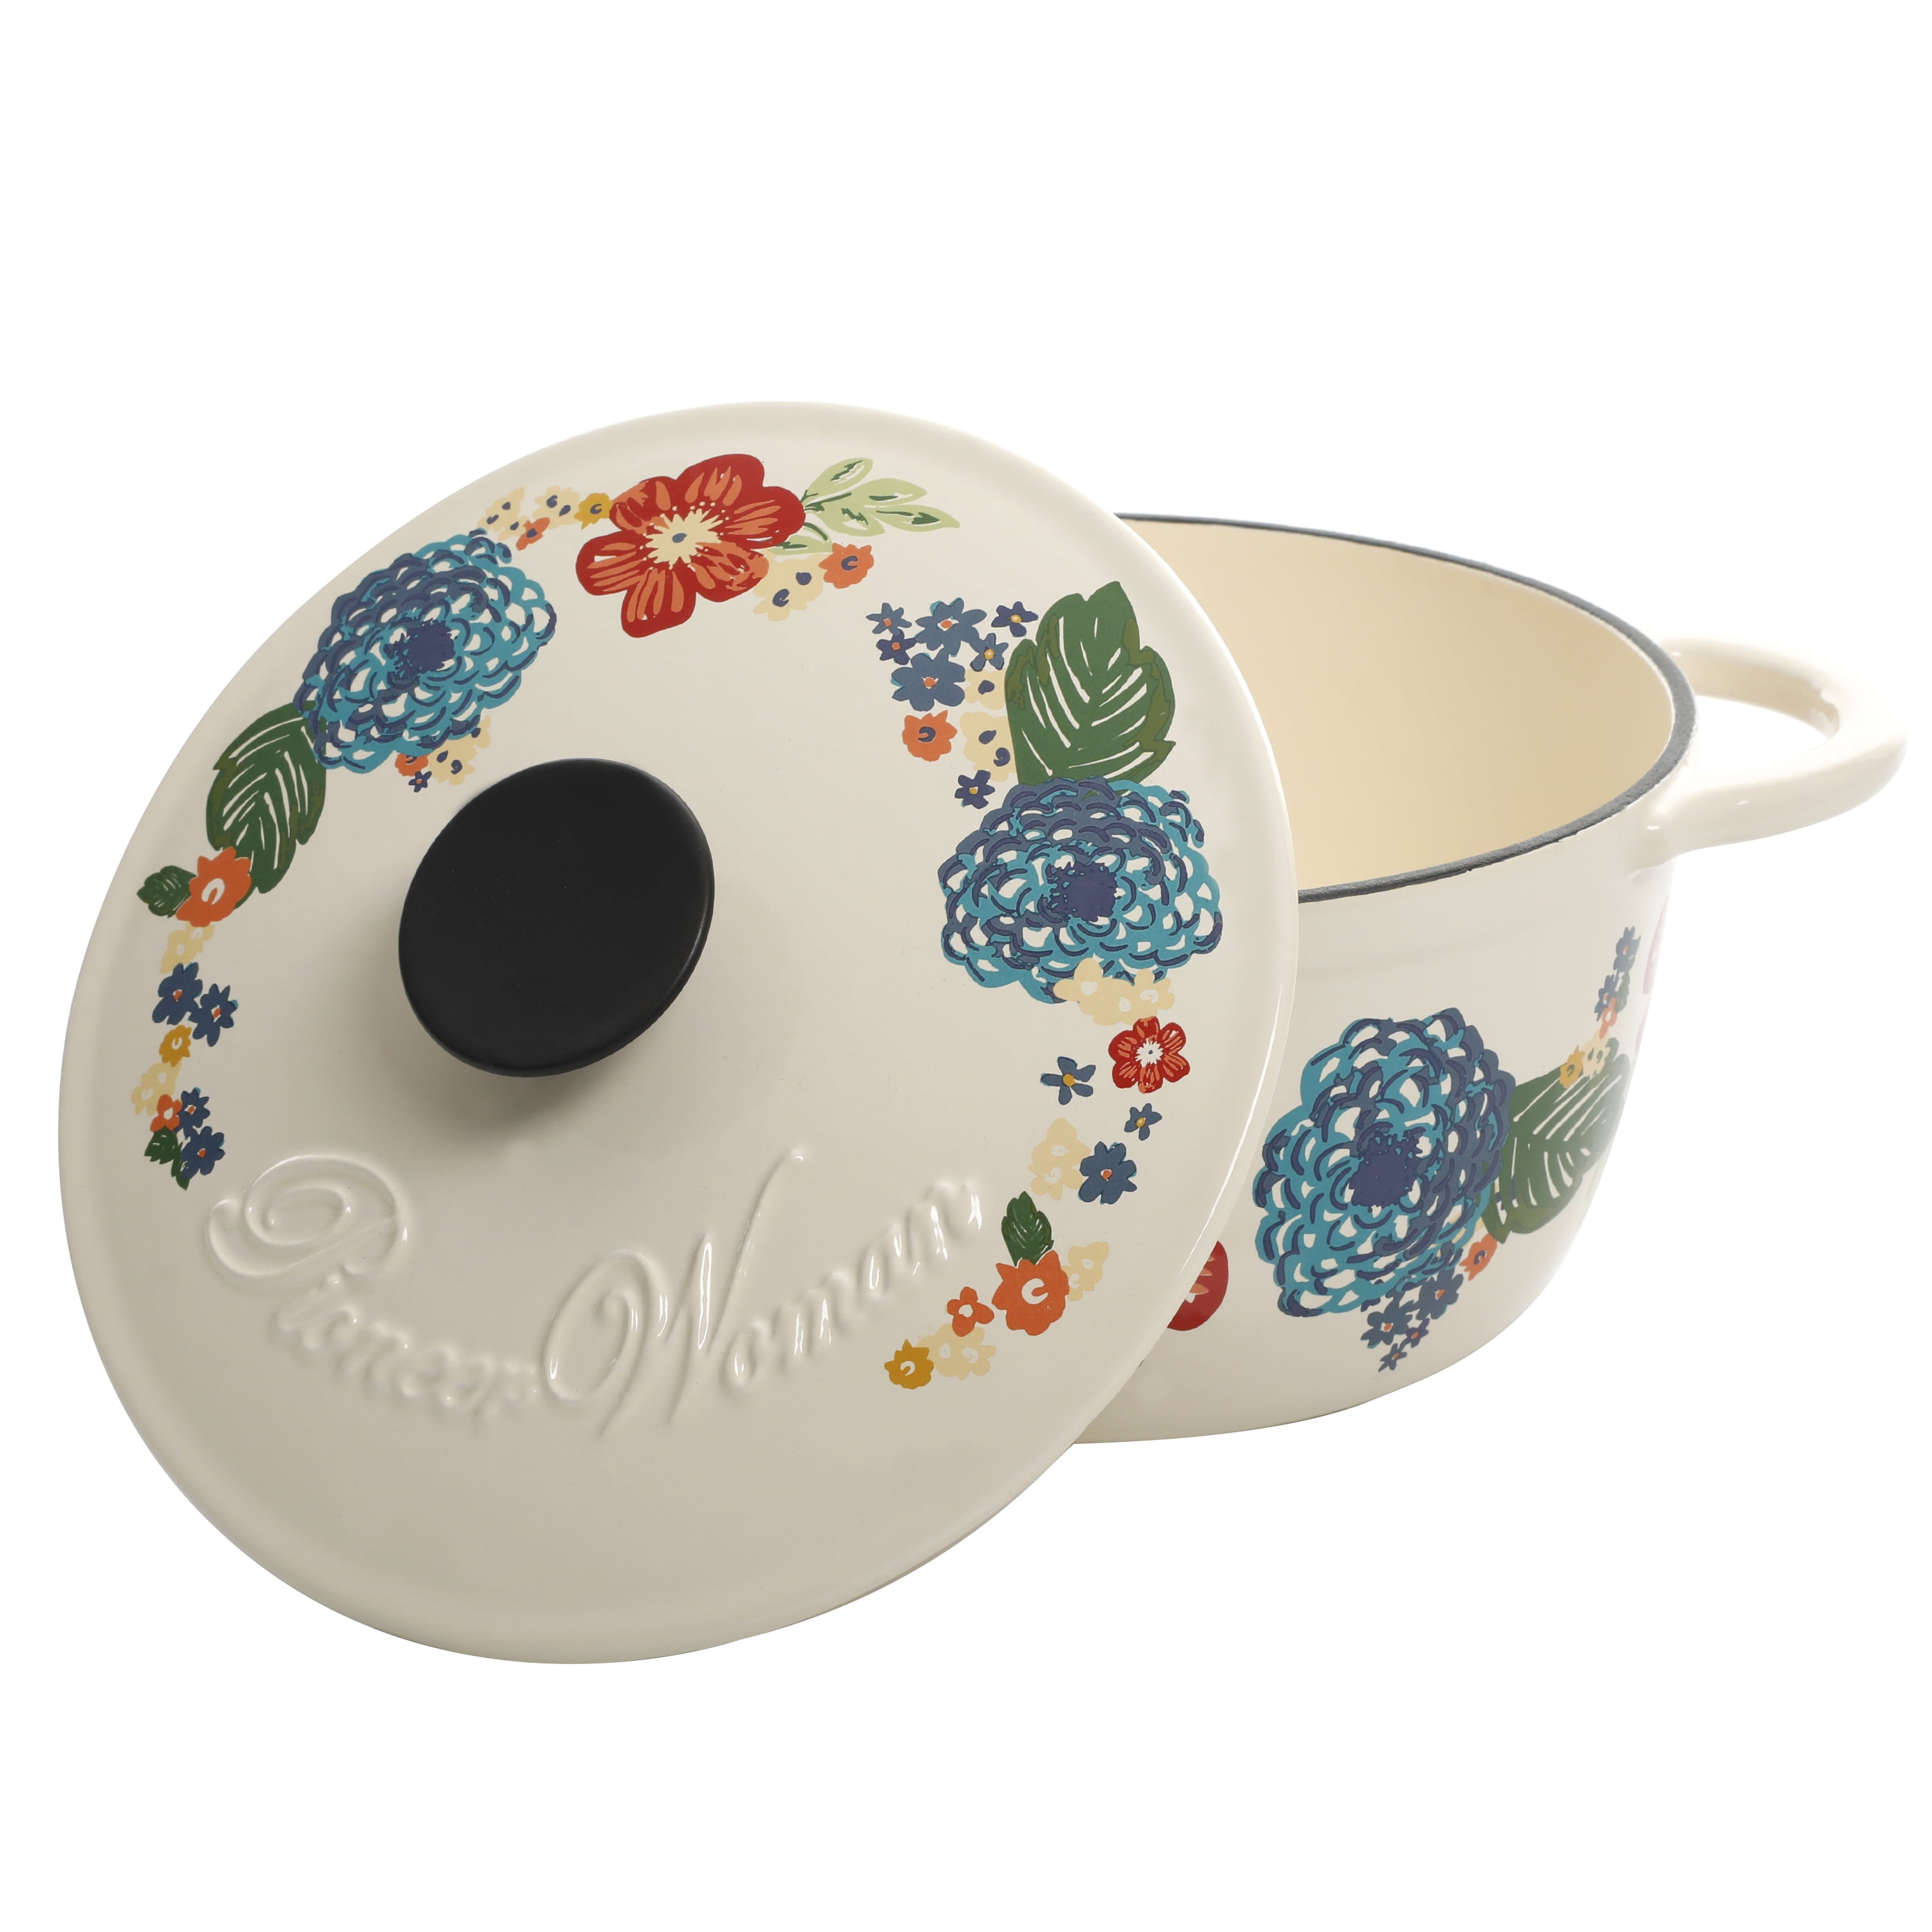  The Pioneer Woman Timeless Beauty Vintage Floral 3-Quart  Enameled Cast Iron Casserole w/Lid: Home & Kitchen